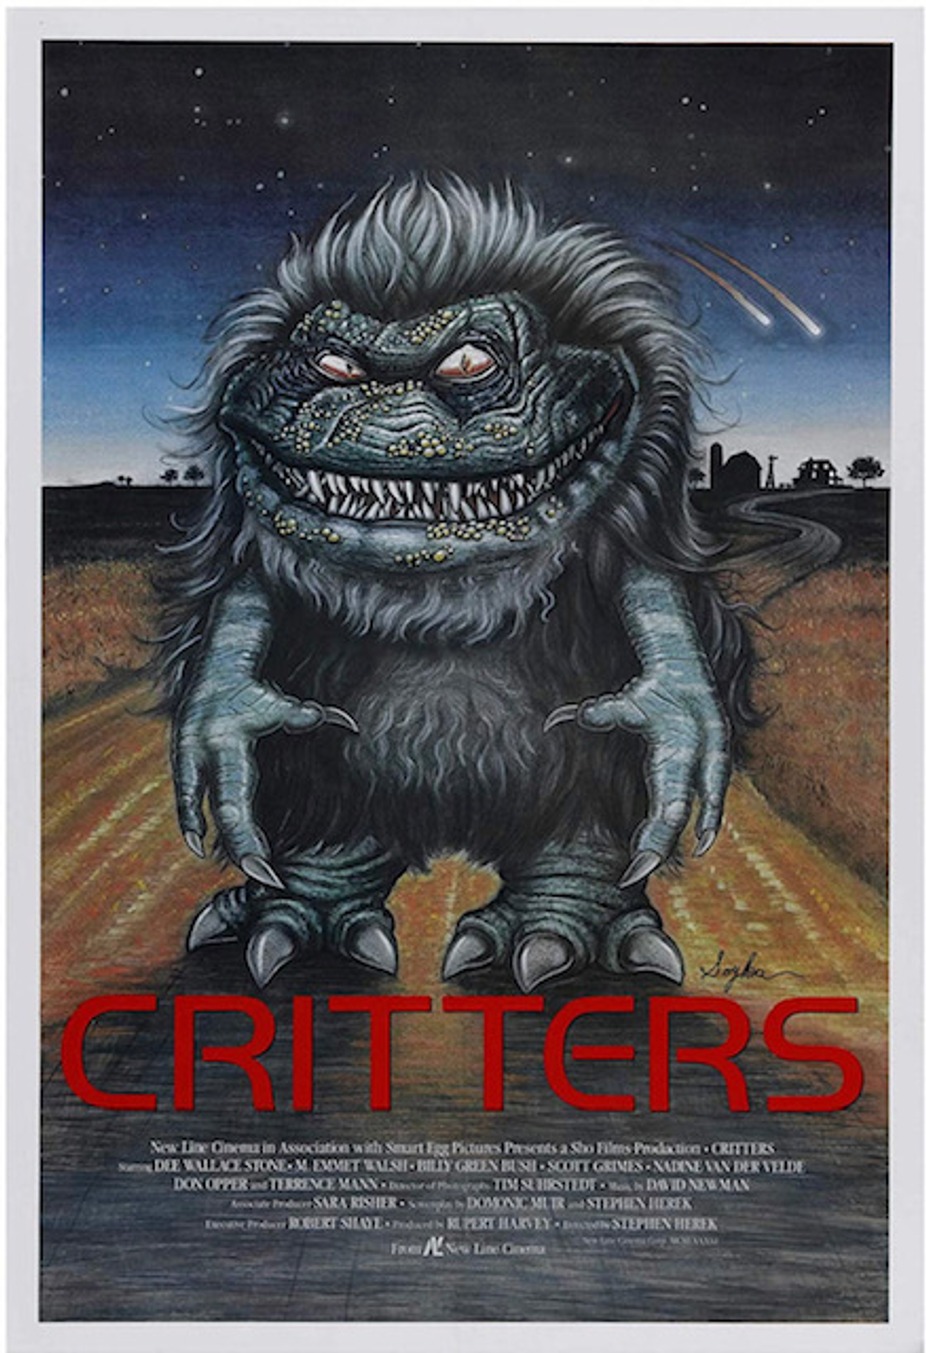 Critters at the Drive-In event photo